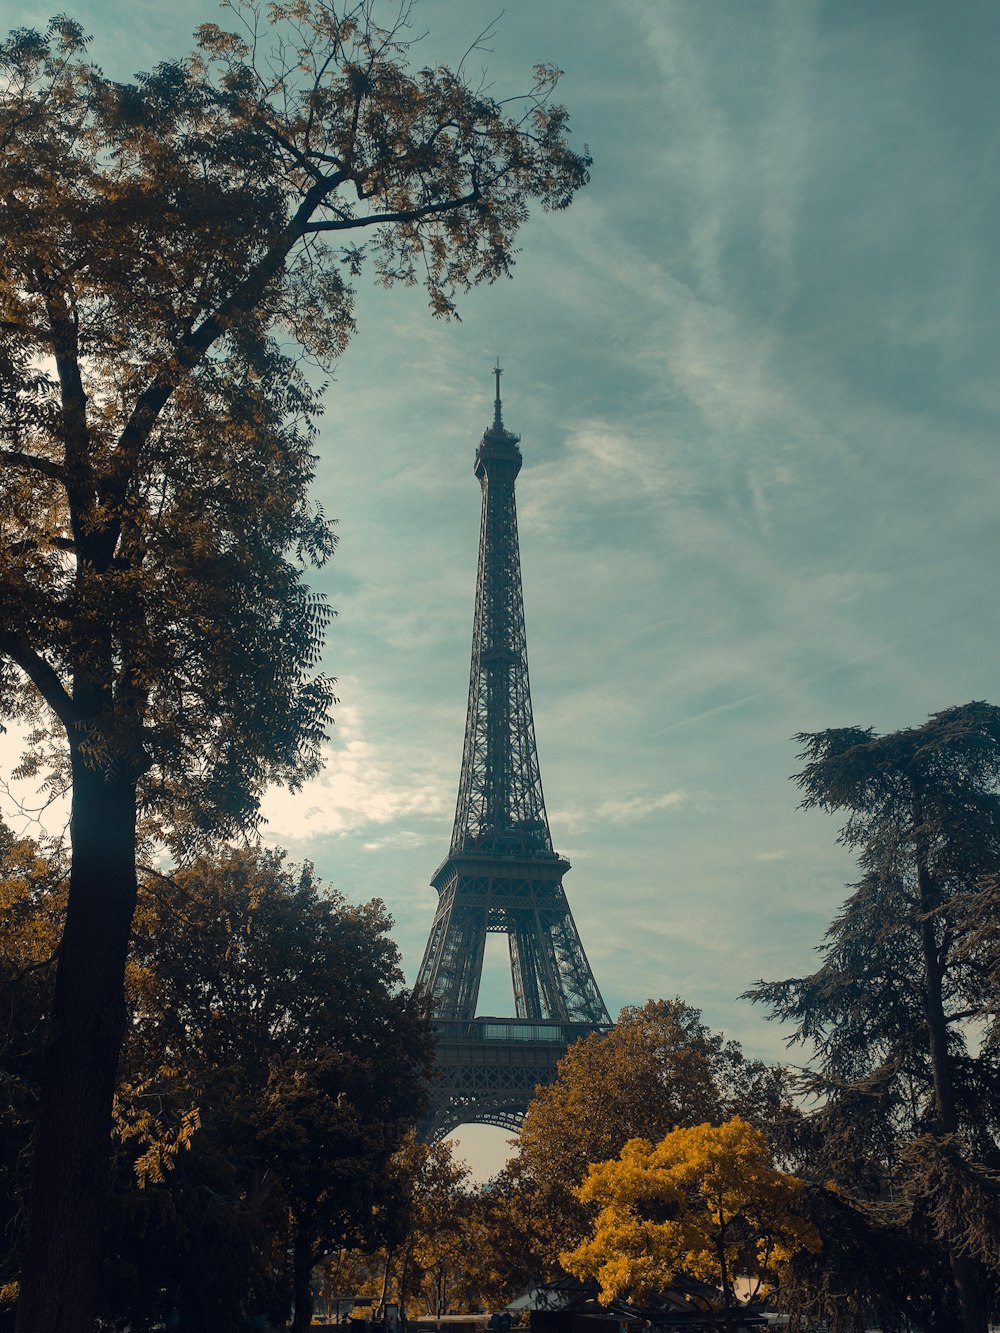 a view of the eiffel tower from a park